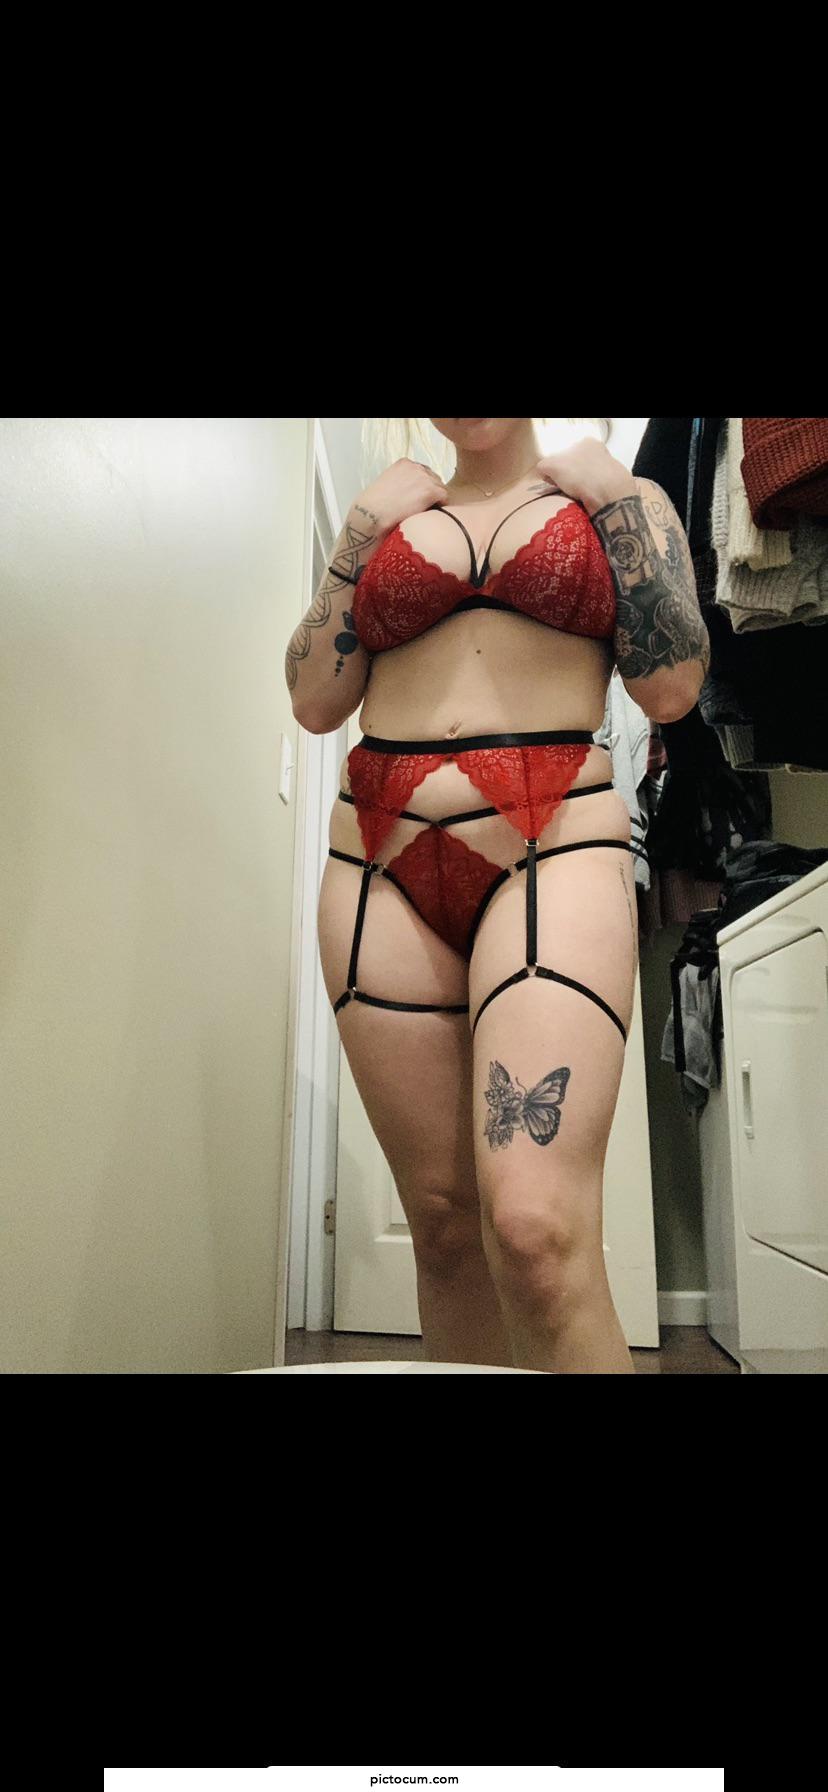 Nothing hotter than a goddess in red lingerie